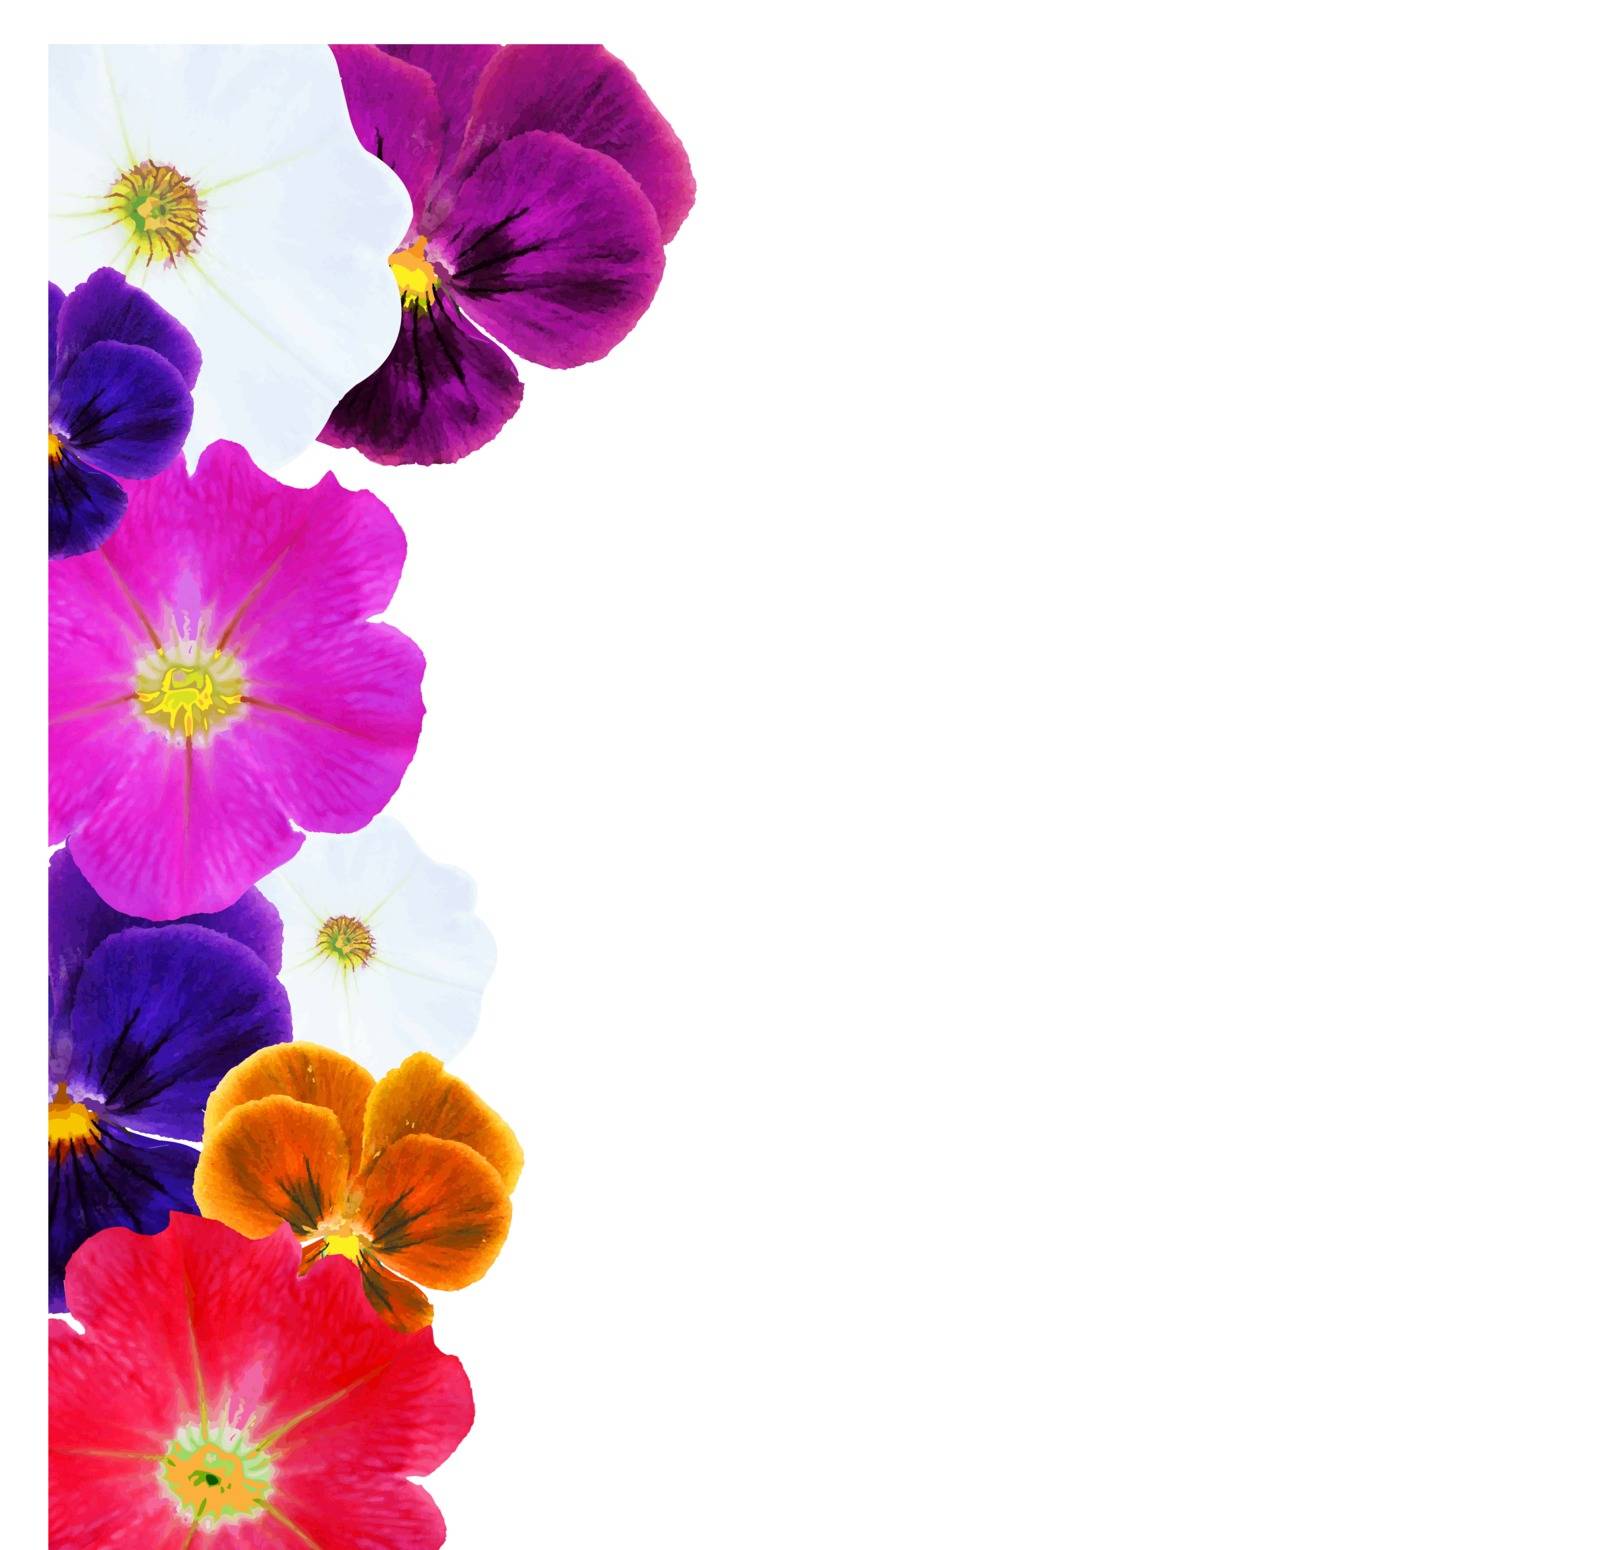 Flower Border, With Gradient Mesh, Isolated On White Background, Vector Illustration